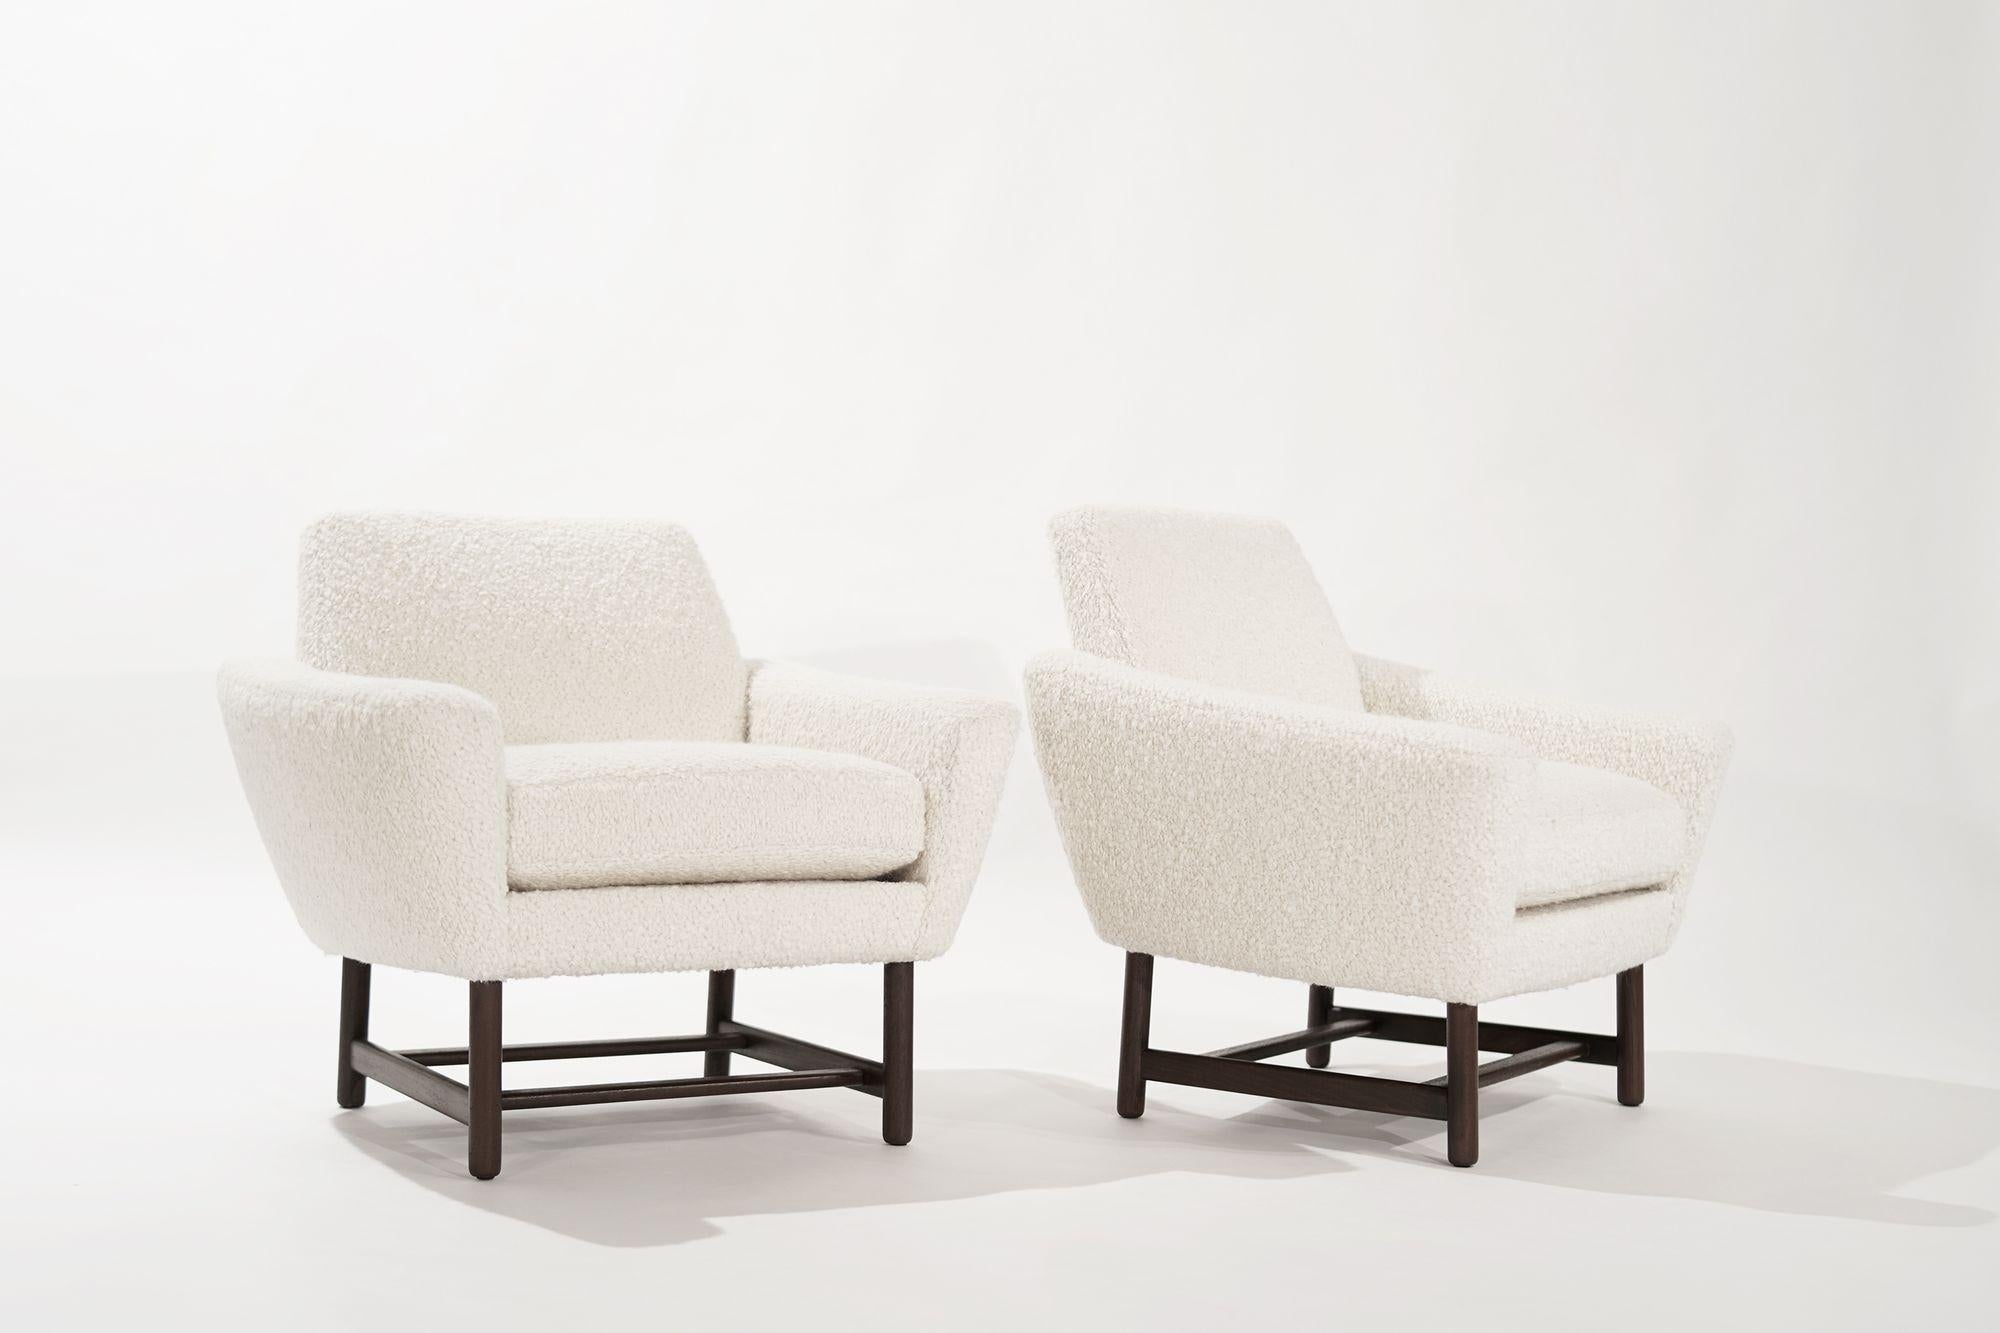 20th Century Sculptural Low-Profile Lounge Chairs in Bouclé, Denmark, 1950s For Sale